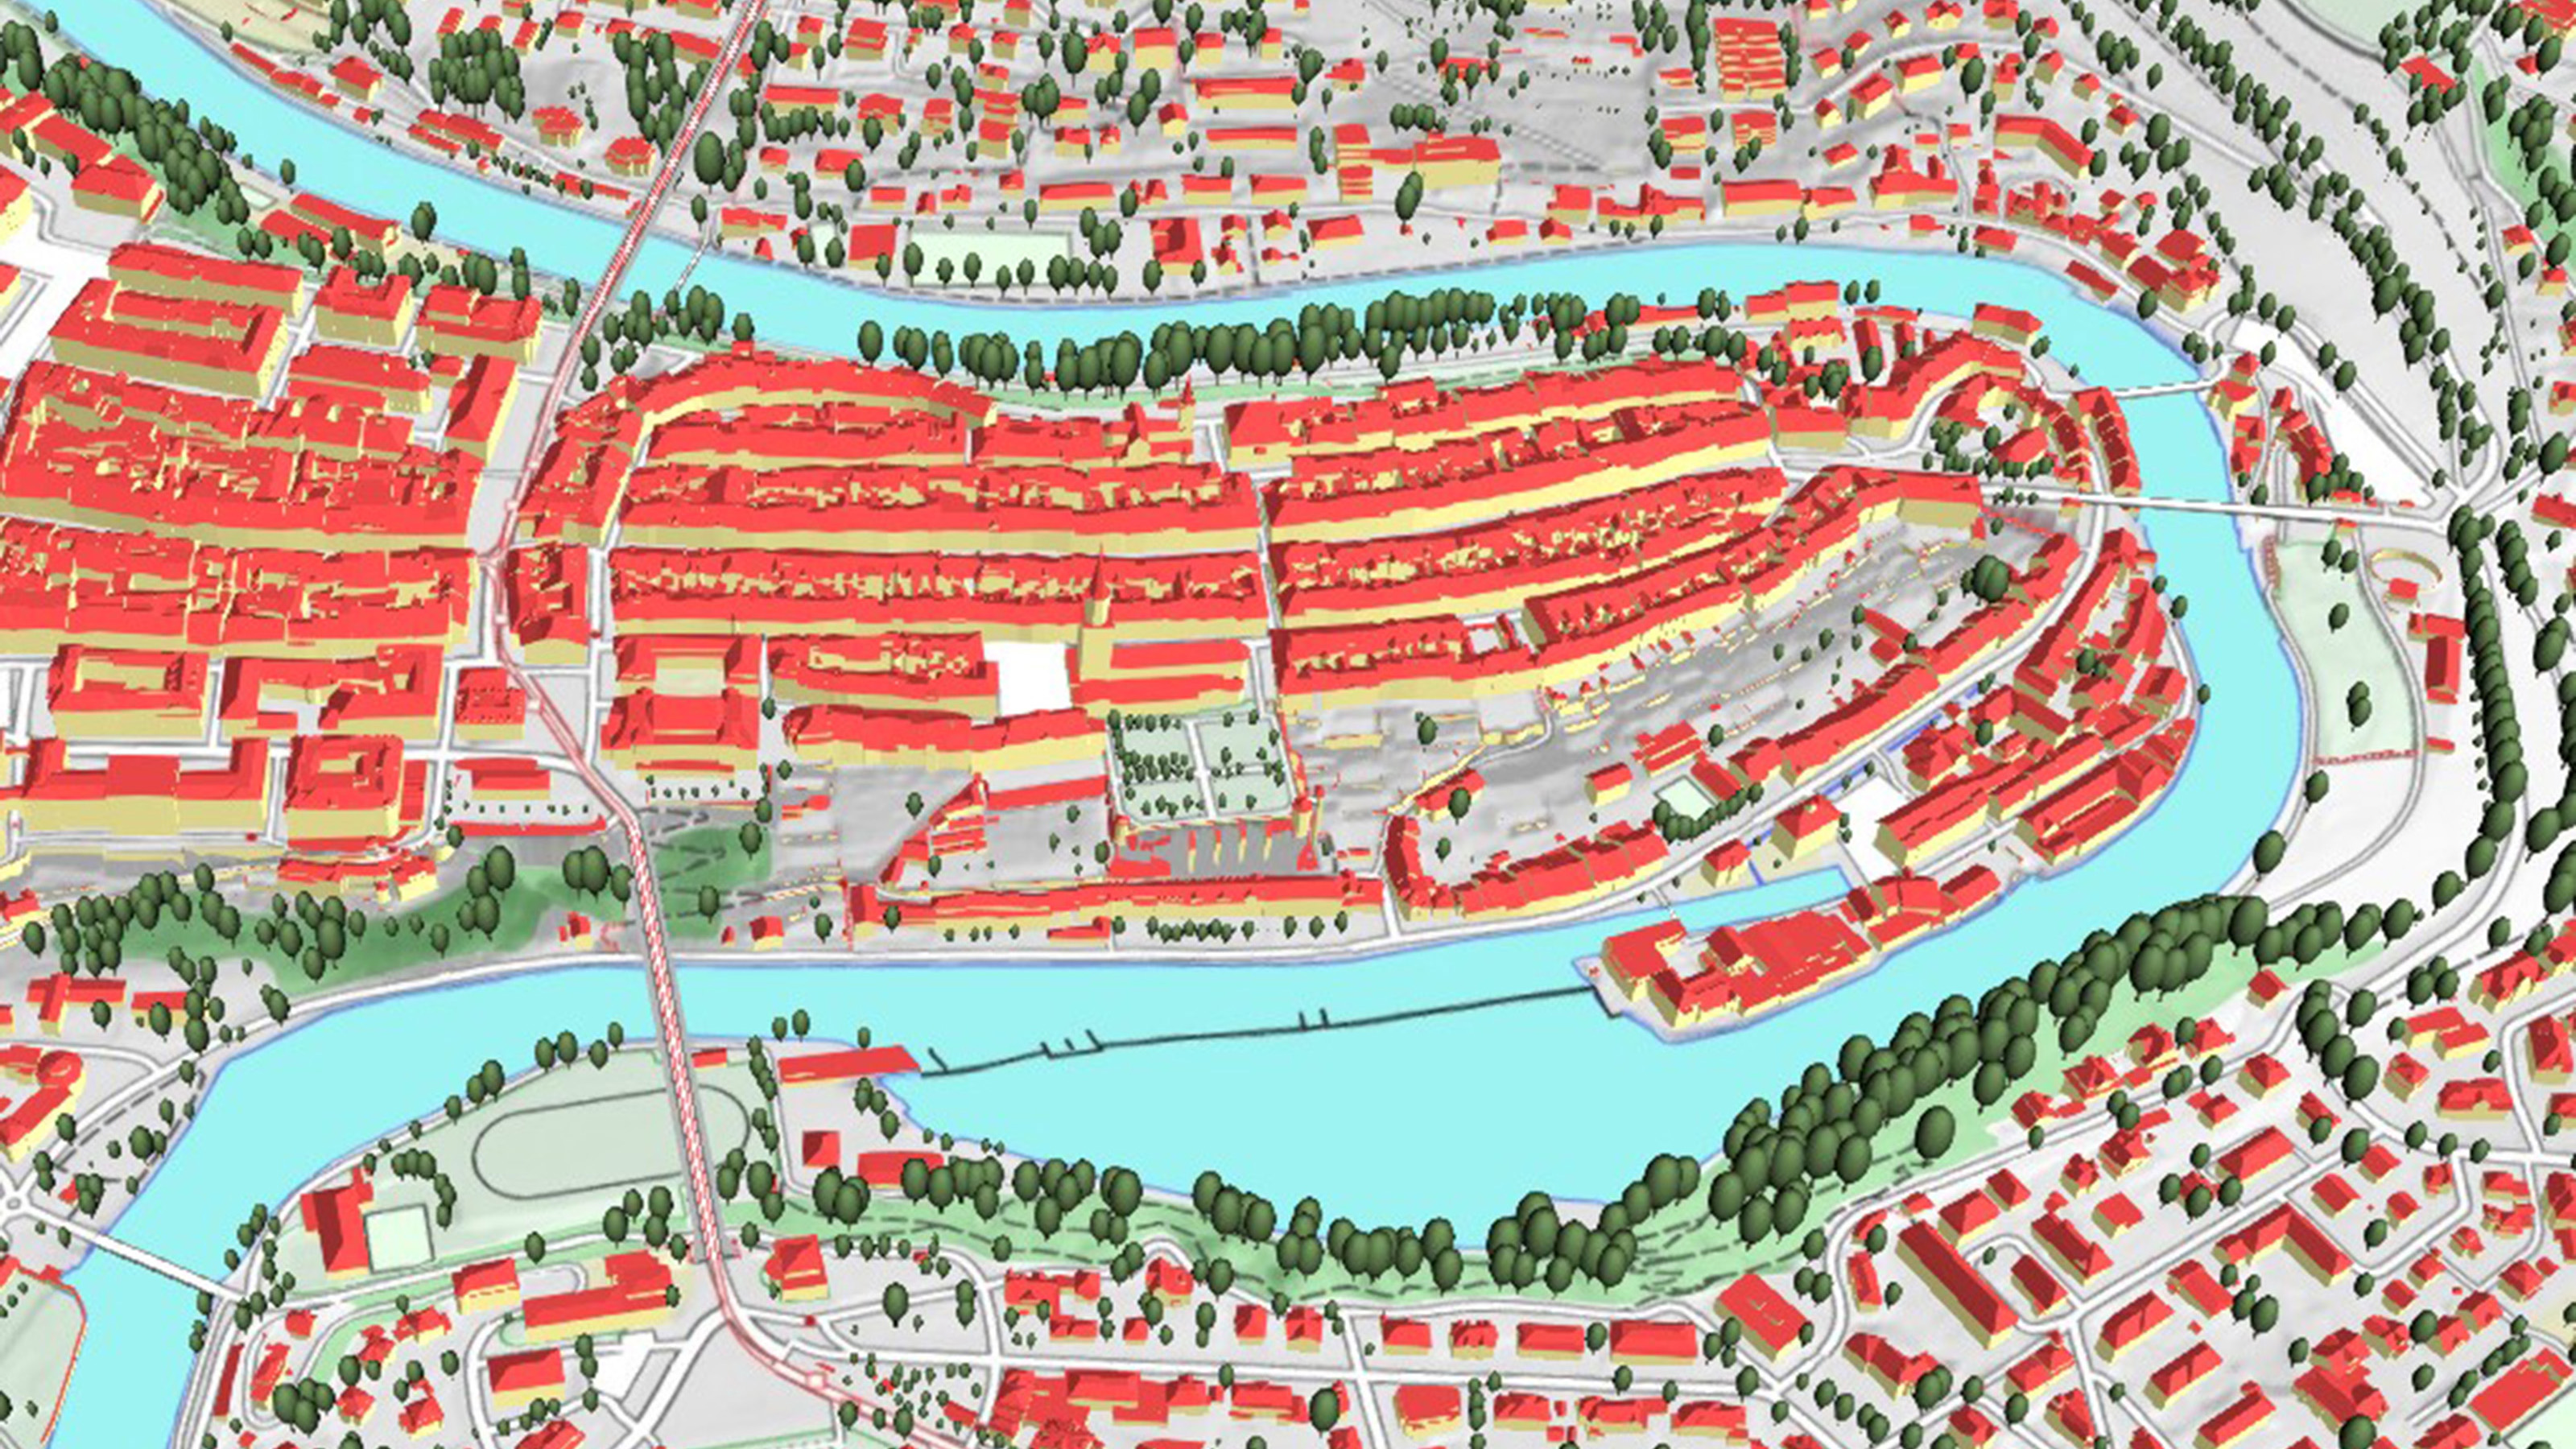 Virtual representation of the old town of Bern, seen from the air